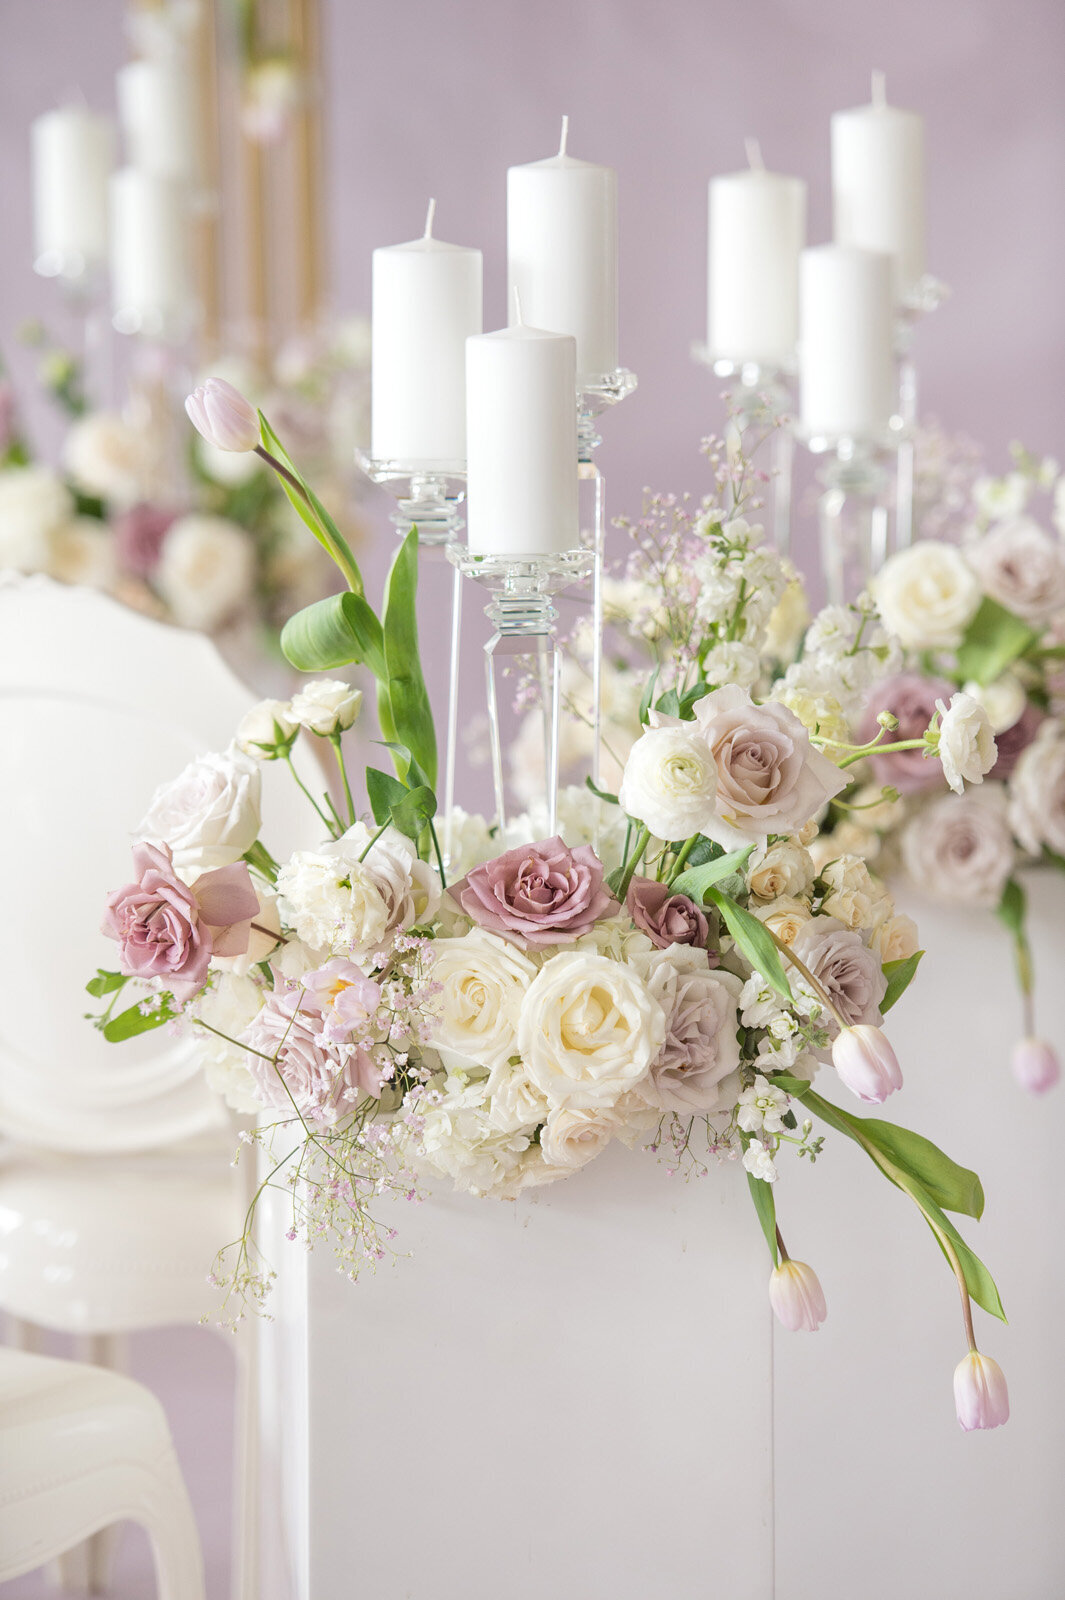 Diana-Pires-Events-Fiore-Wedluxe-04